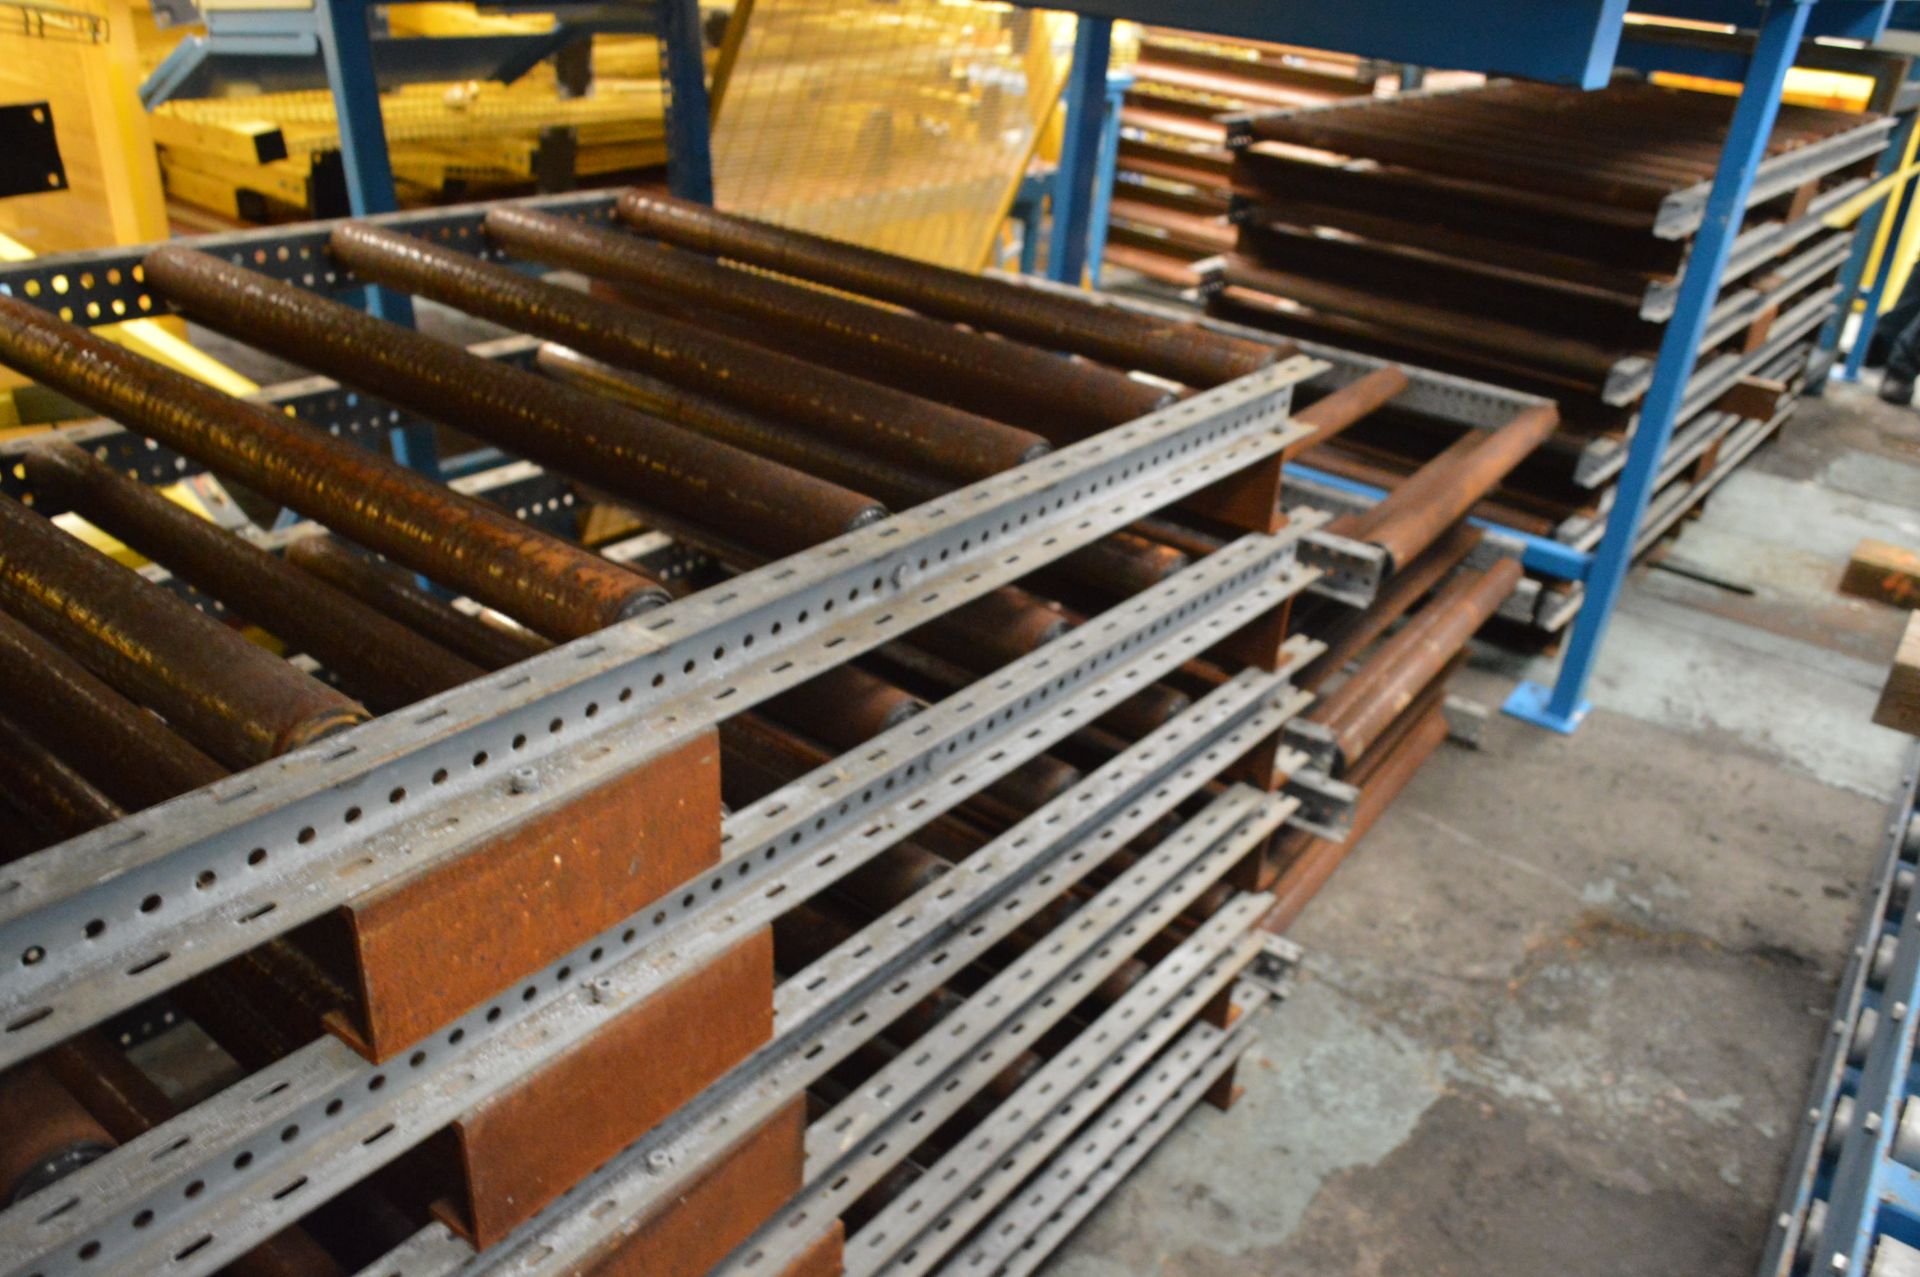 24 Galvanised Steel Framed Roller Conveyors, 950mm wide on rollers, up to 2.5m long - Image 2 of 2